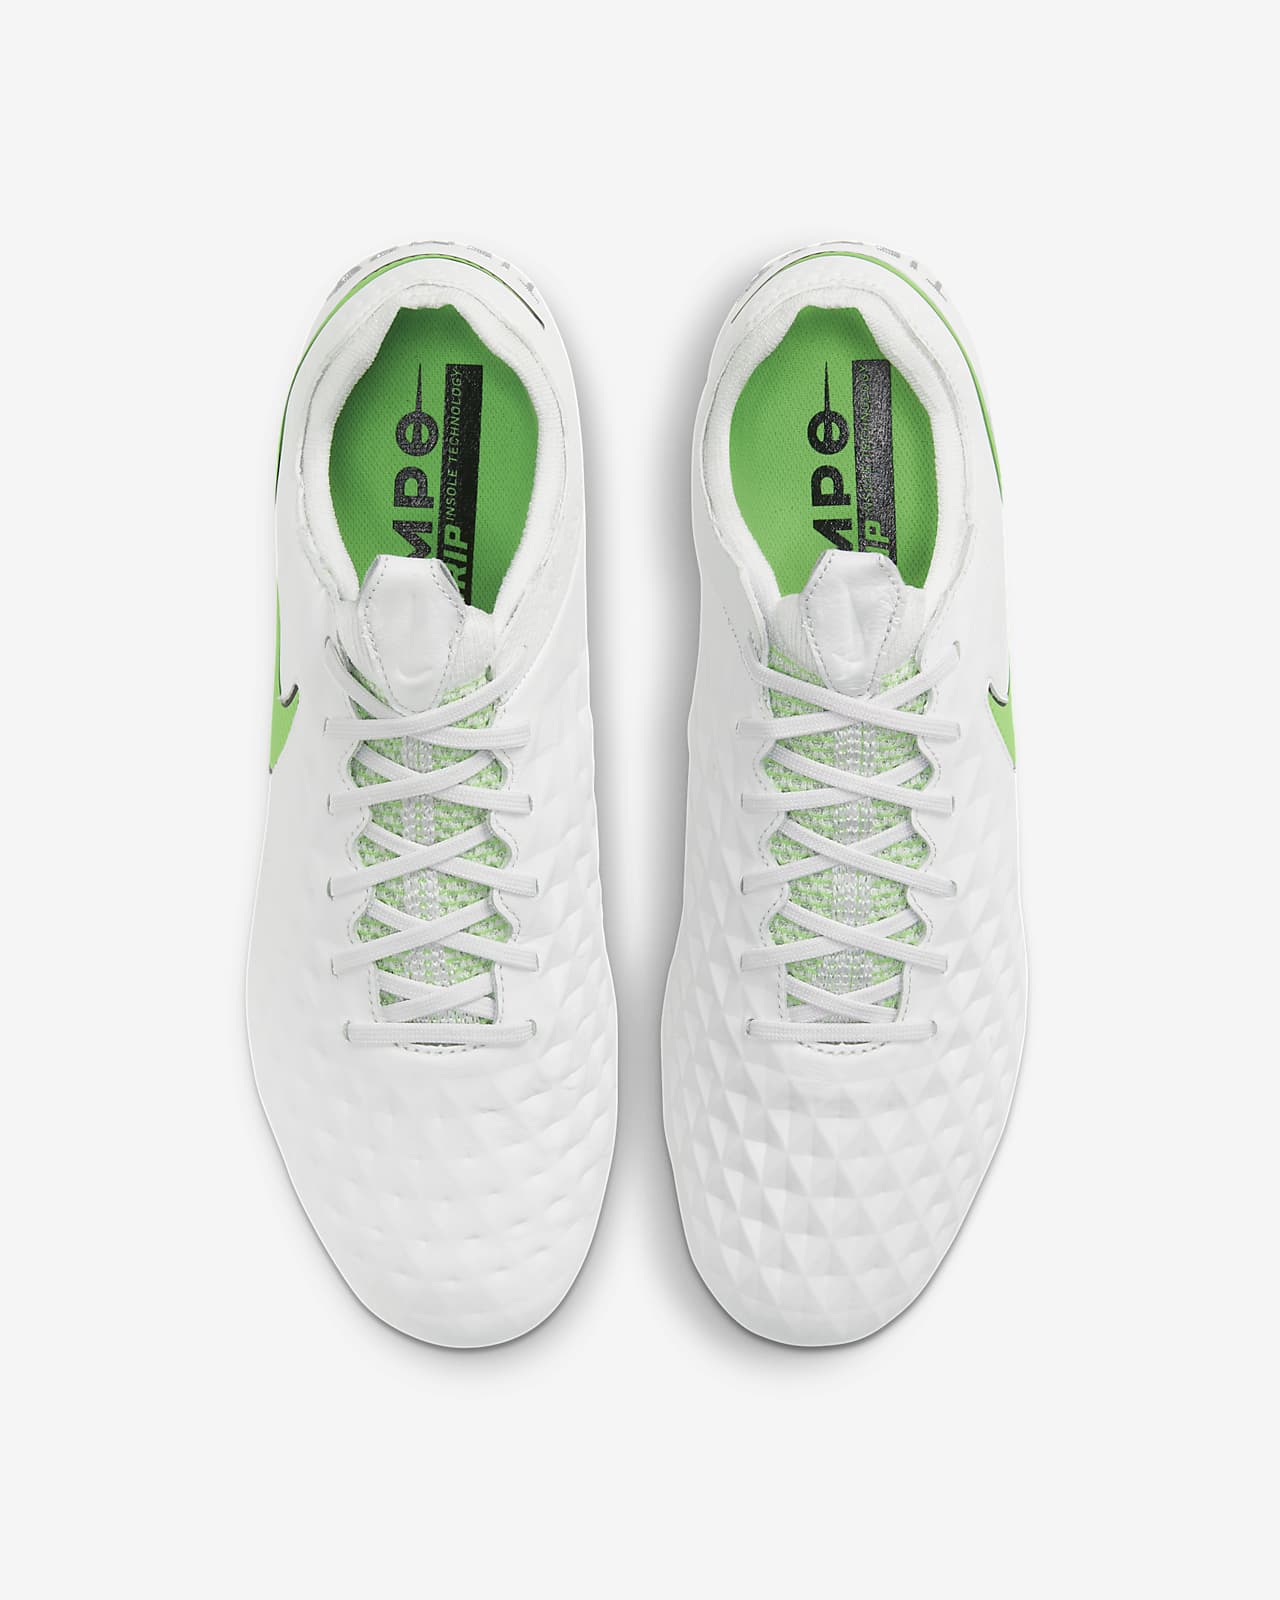 nike tiempo football shoes price in india